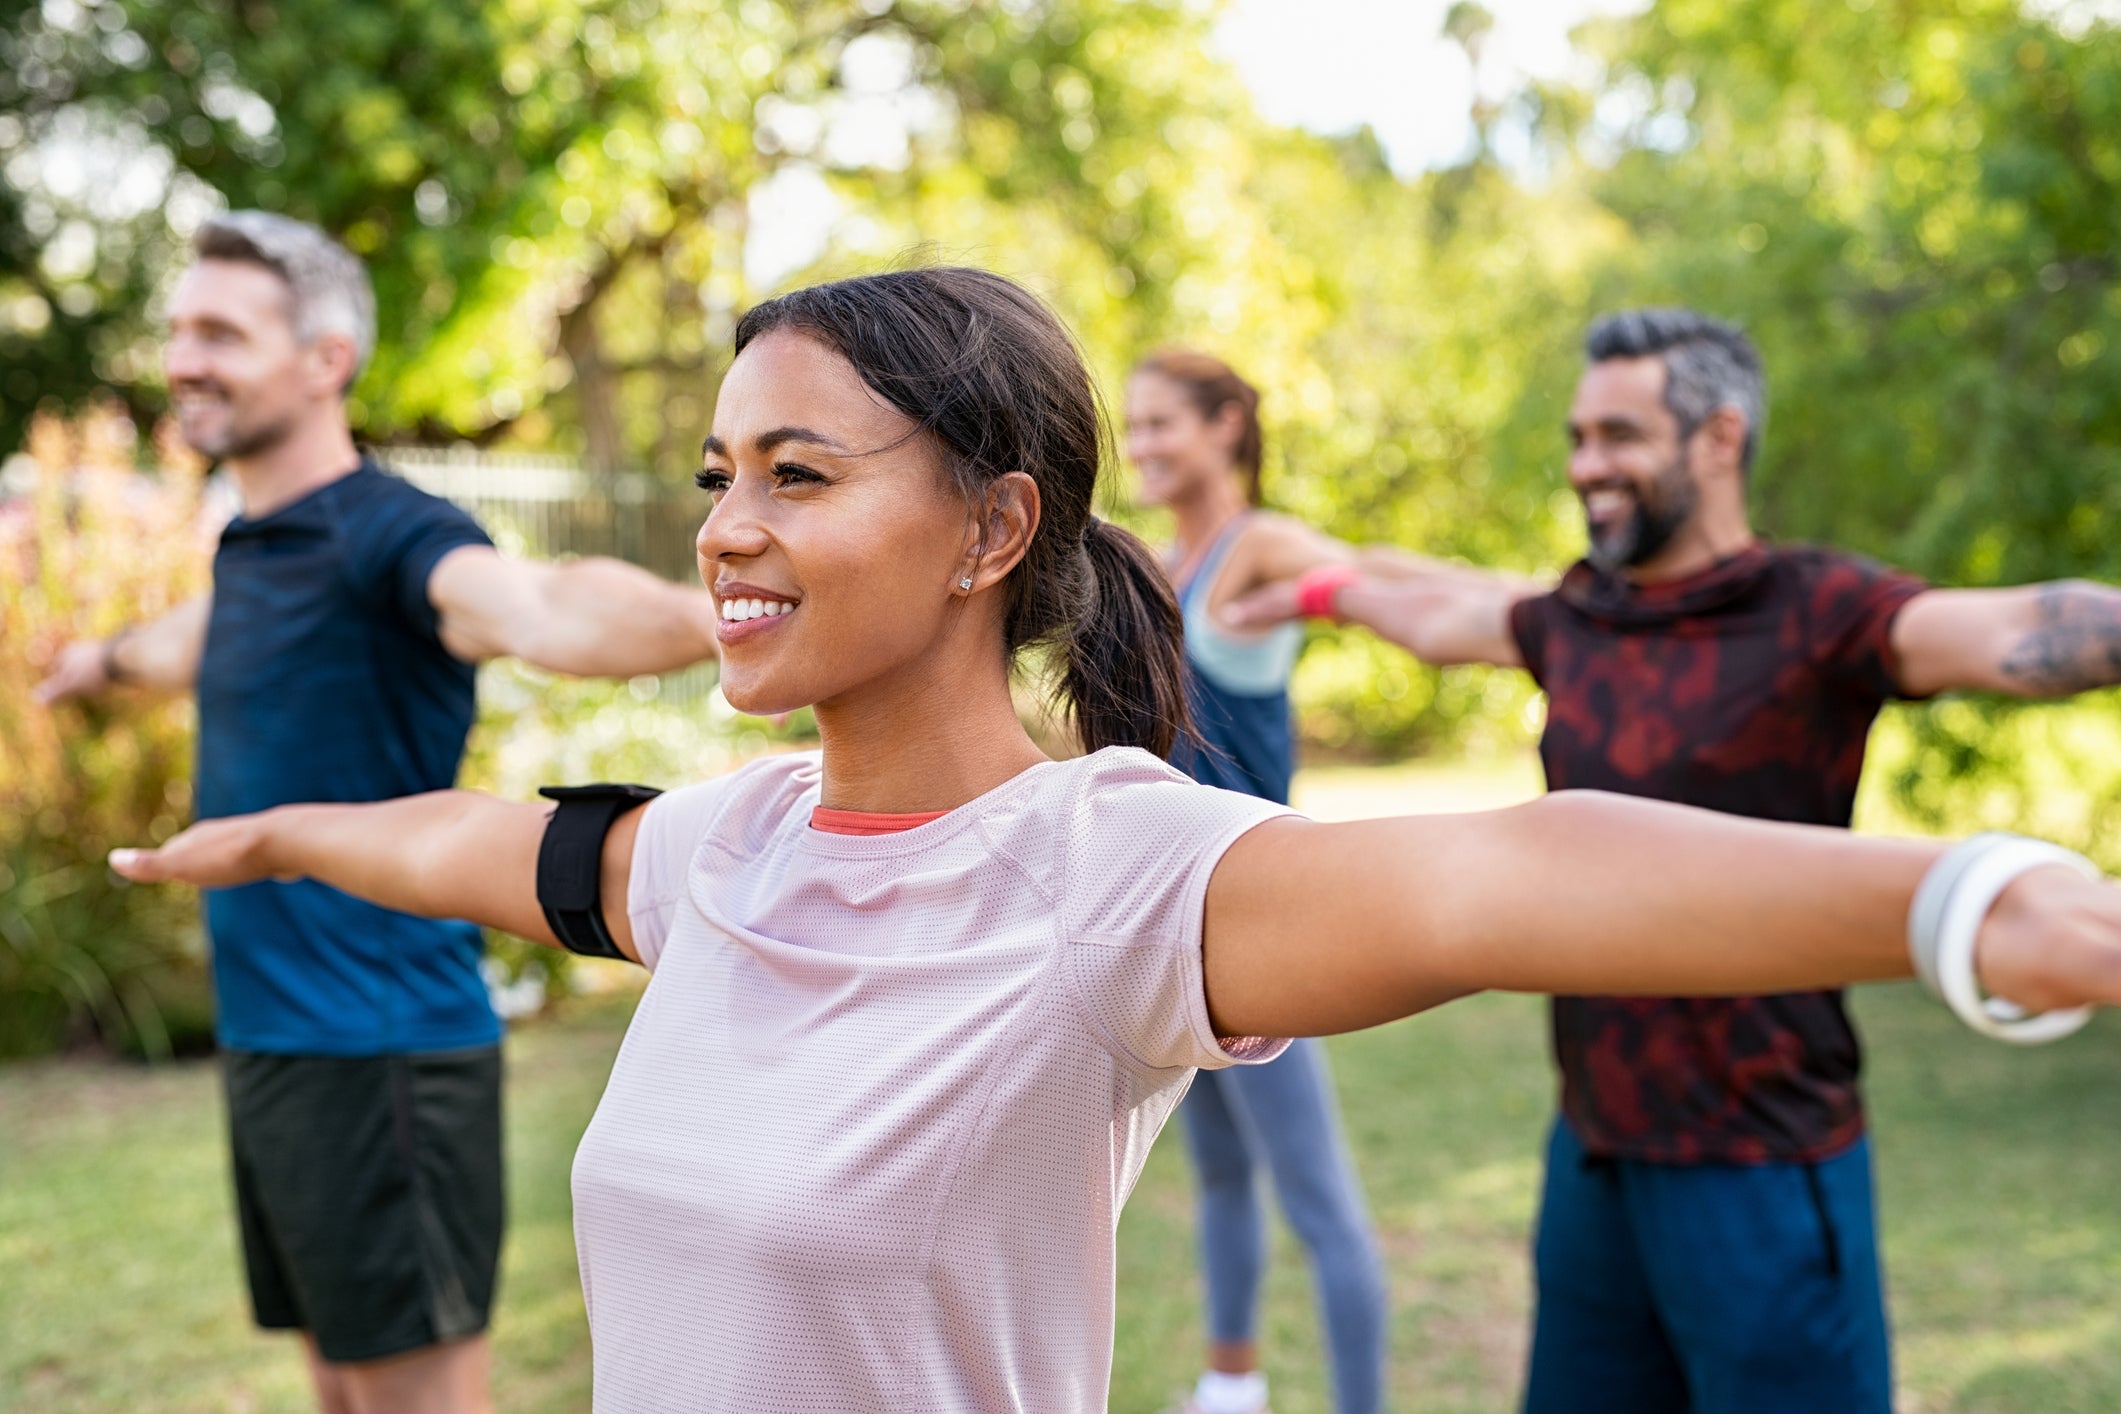 Working out in a group can help with motivation